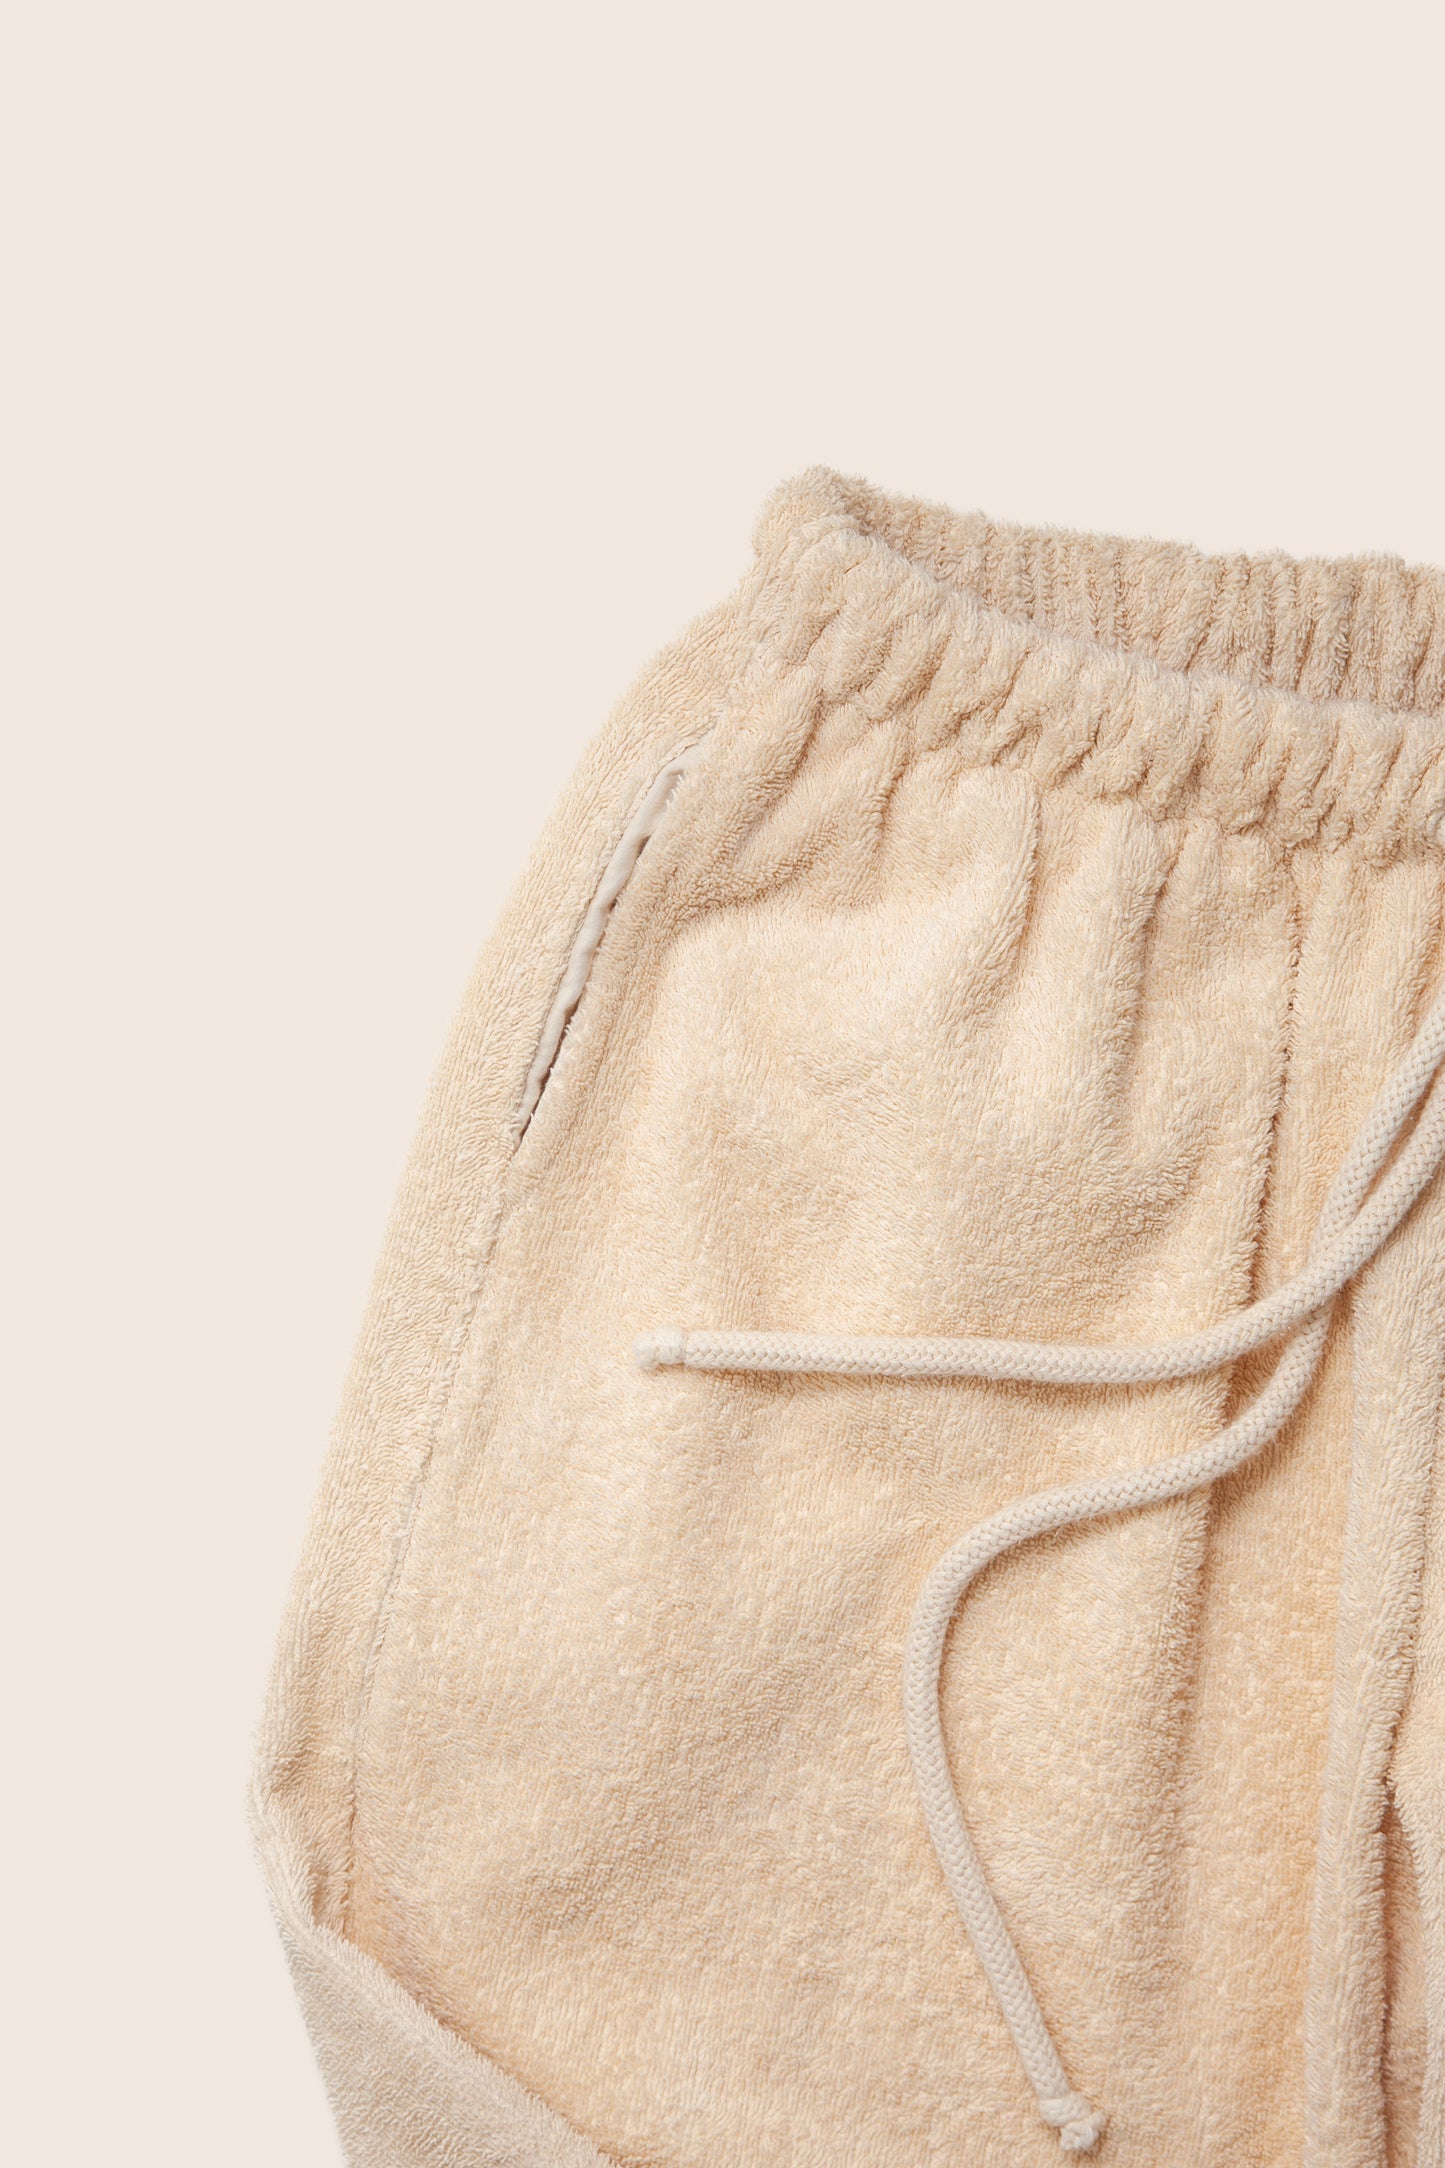 Unisex Cropped Terry Pants in Sand